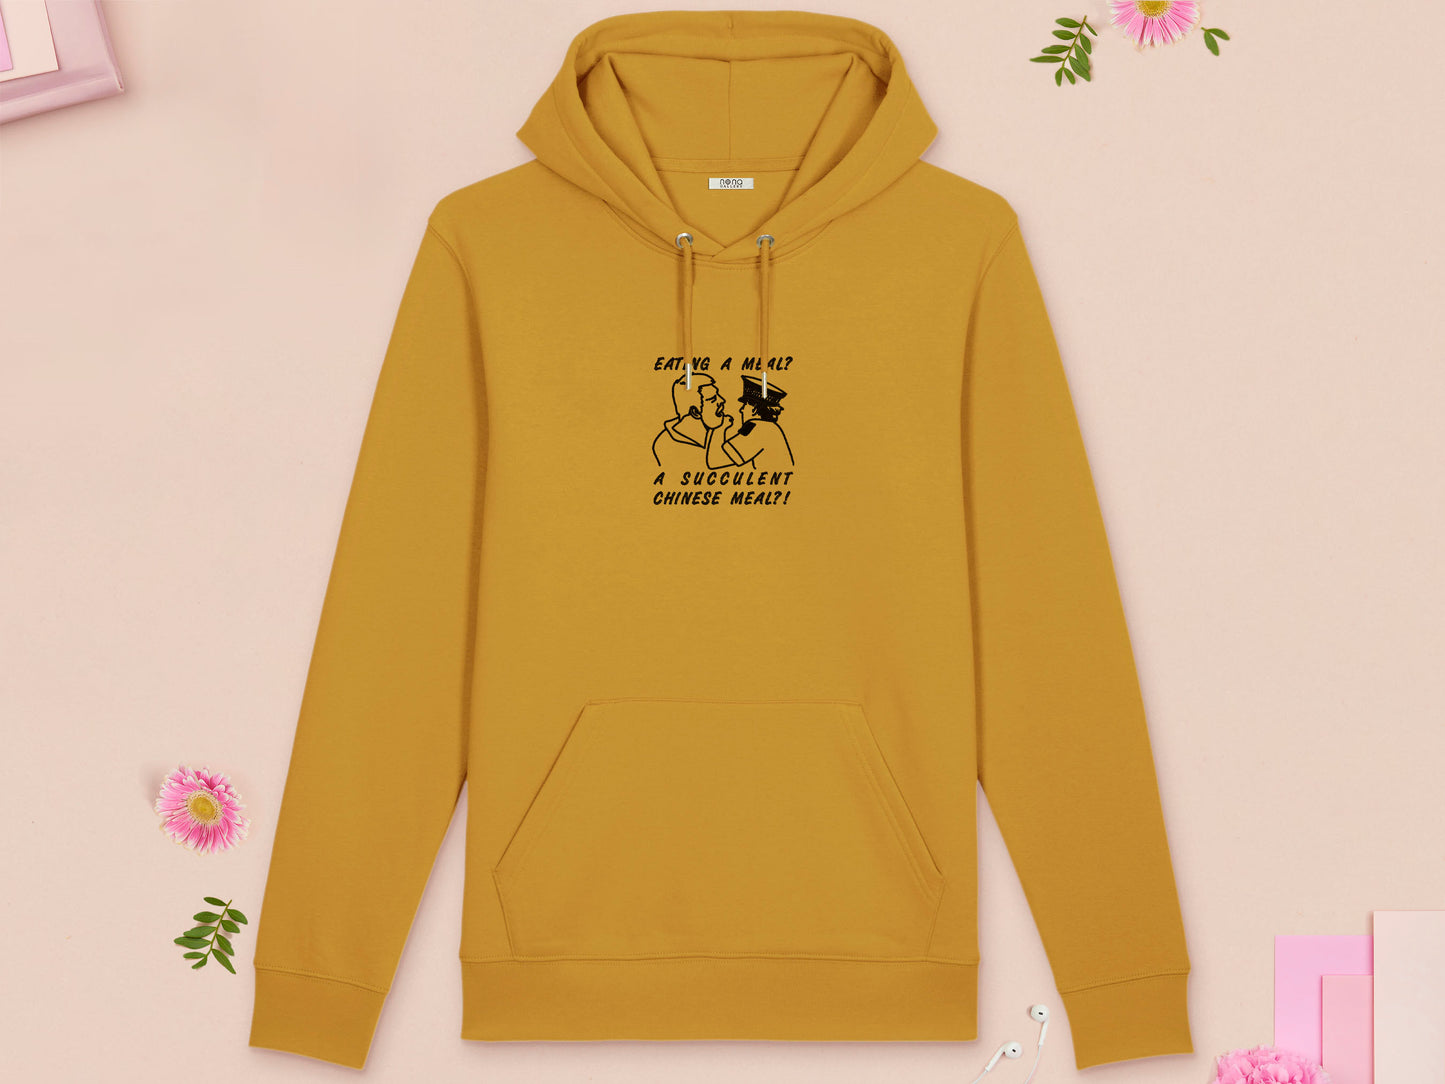 A yellow long sleeve fleece hoodie, with an embroidered black thread design of the viral democracy manifest video of Charles Dozsa being arrested by a policeman with the text reading Eating A Meal? A Succulent Chinese Meal?!